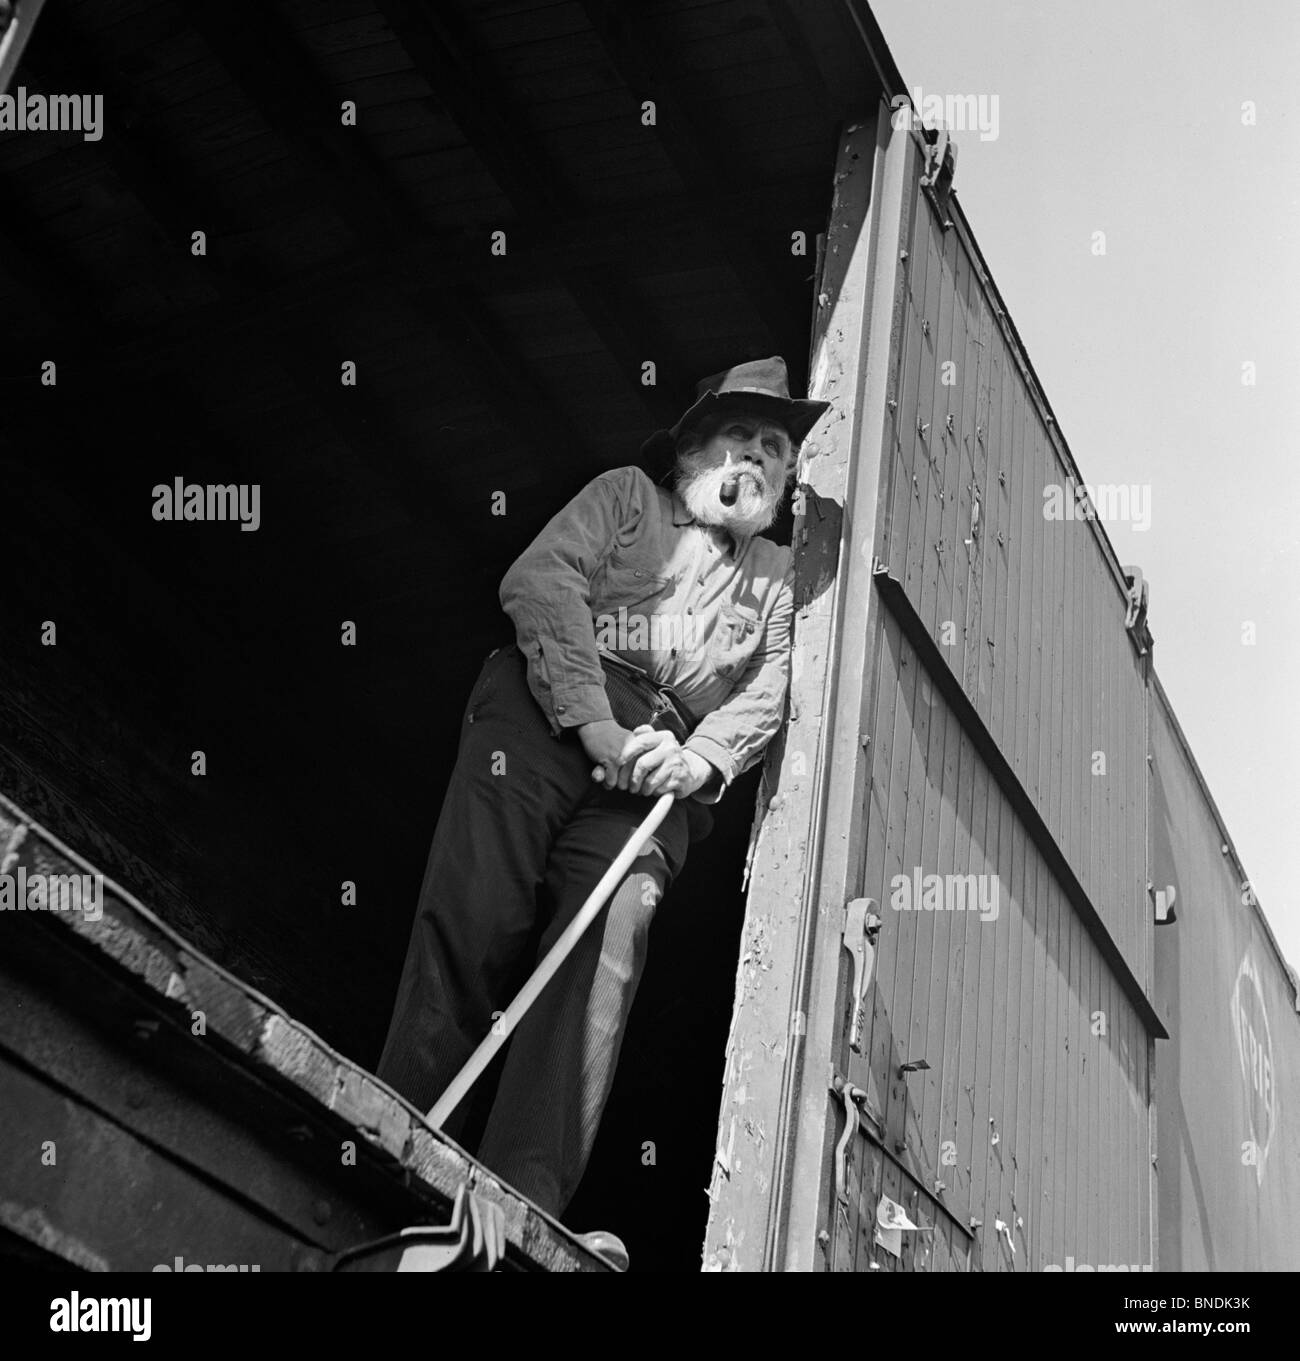 Low angle view of a senior man standing in a train car Stock Photo